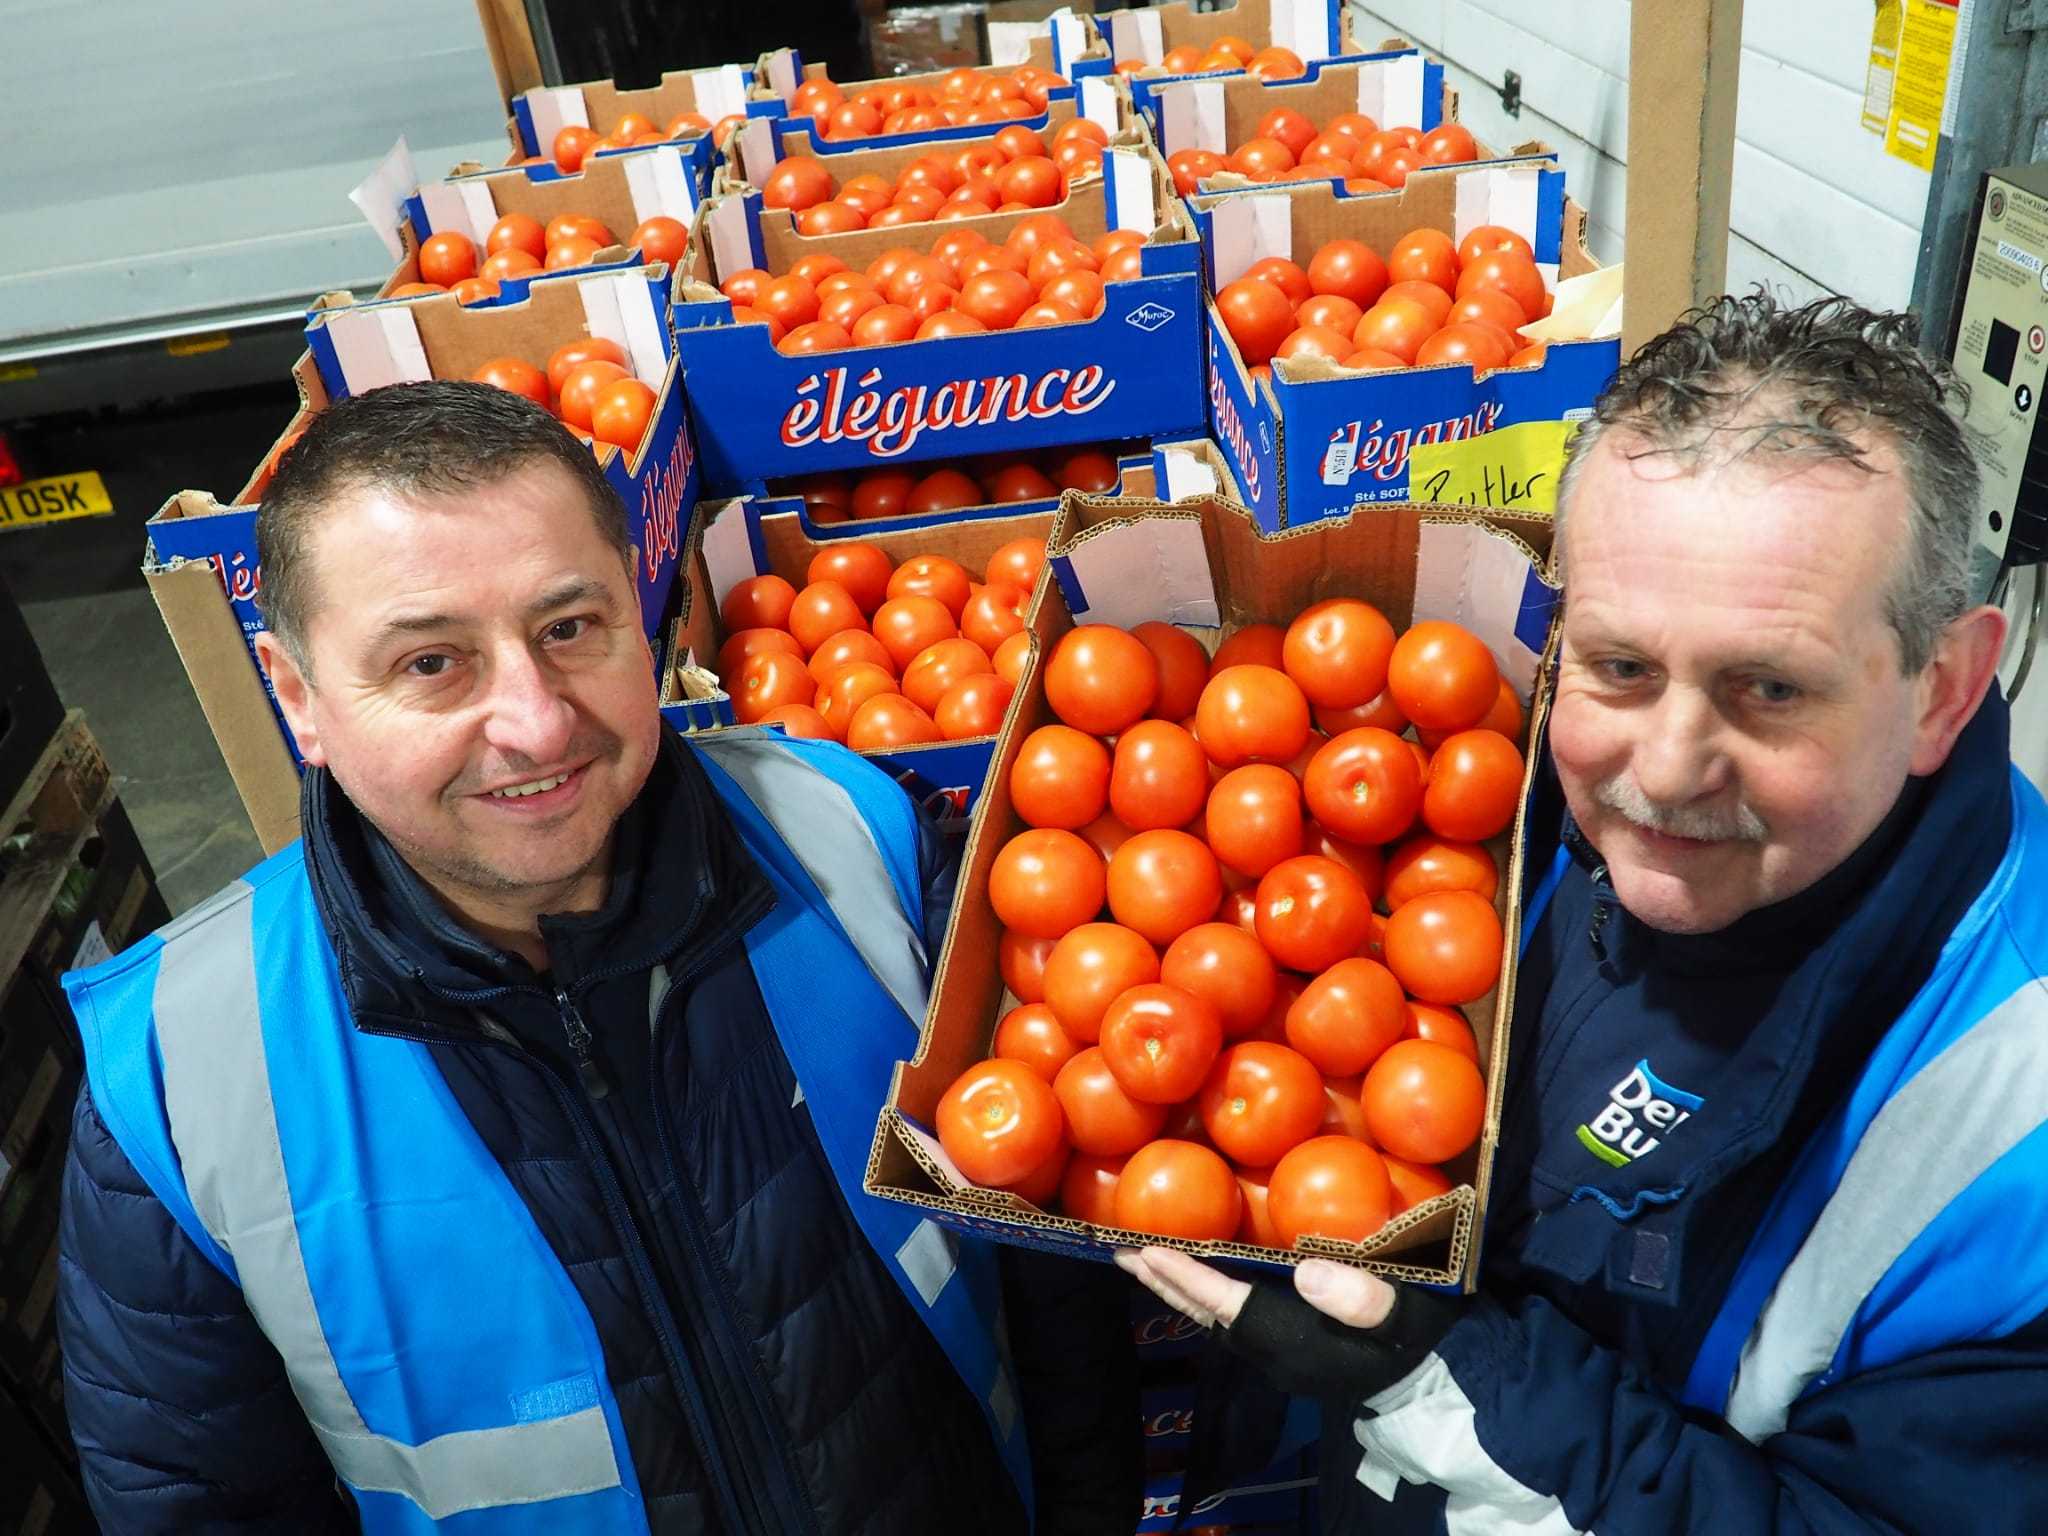 Hull fruit and veg wholesaler explains why there’s shortages and if they’re set to last